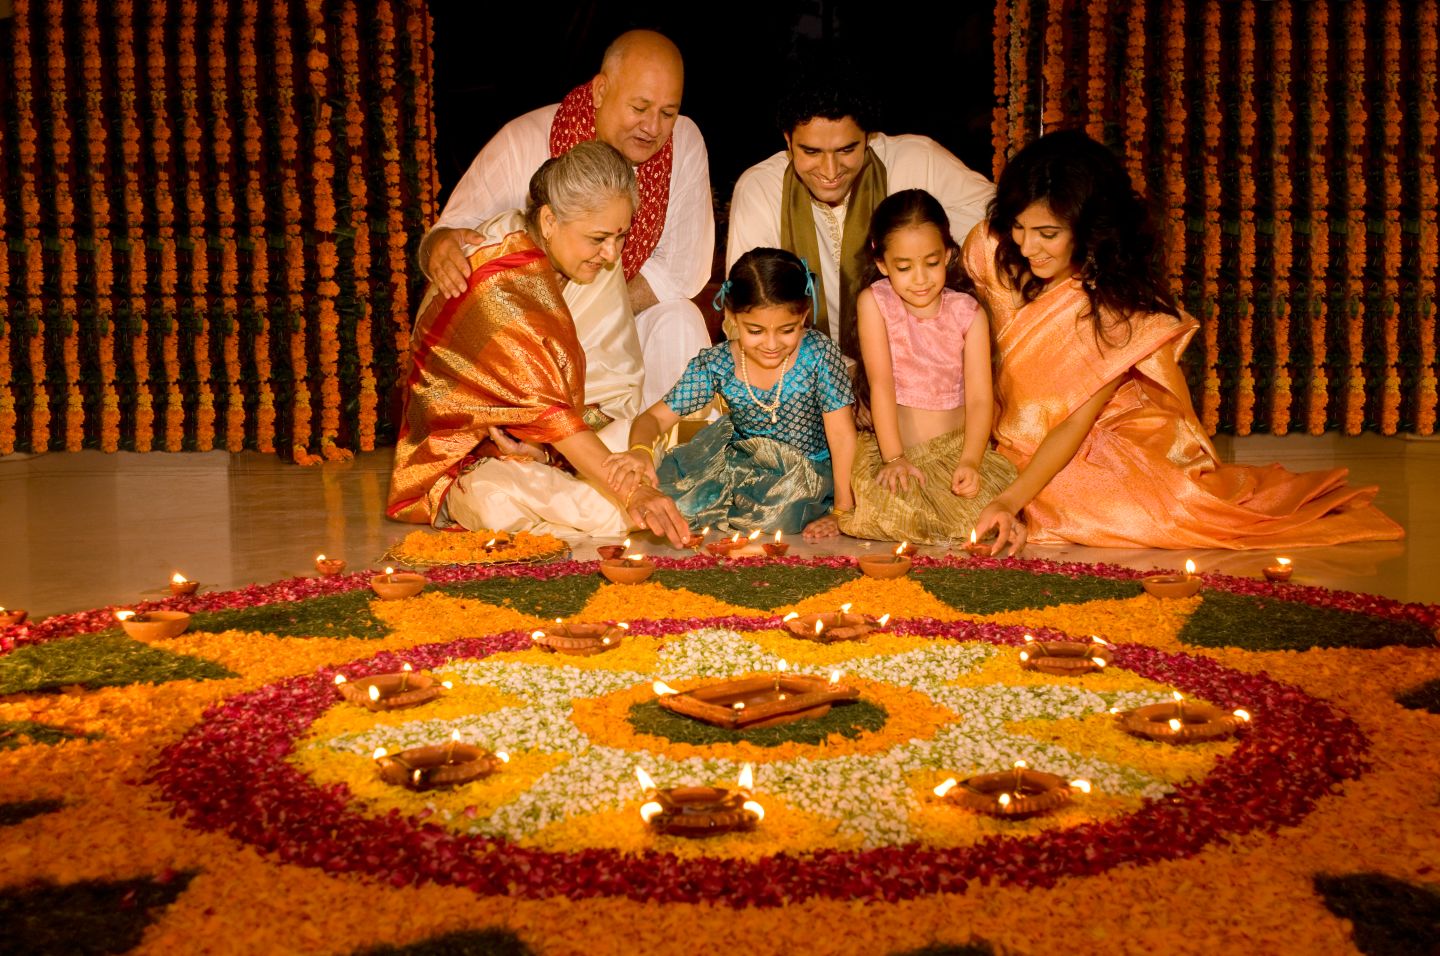 Diwali Celebration in India How to Celebrate, What to do during Diwali